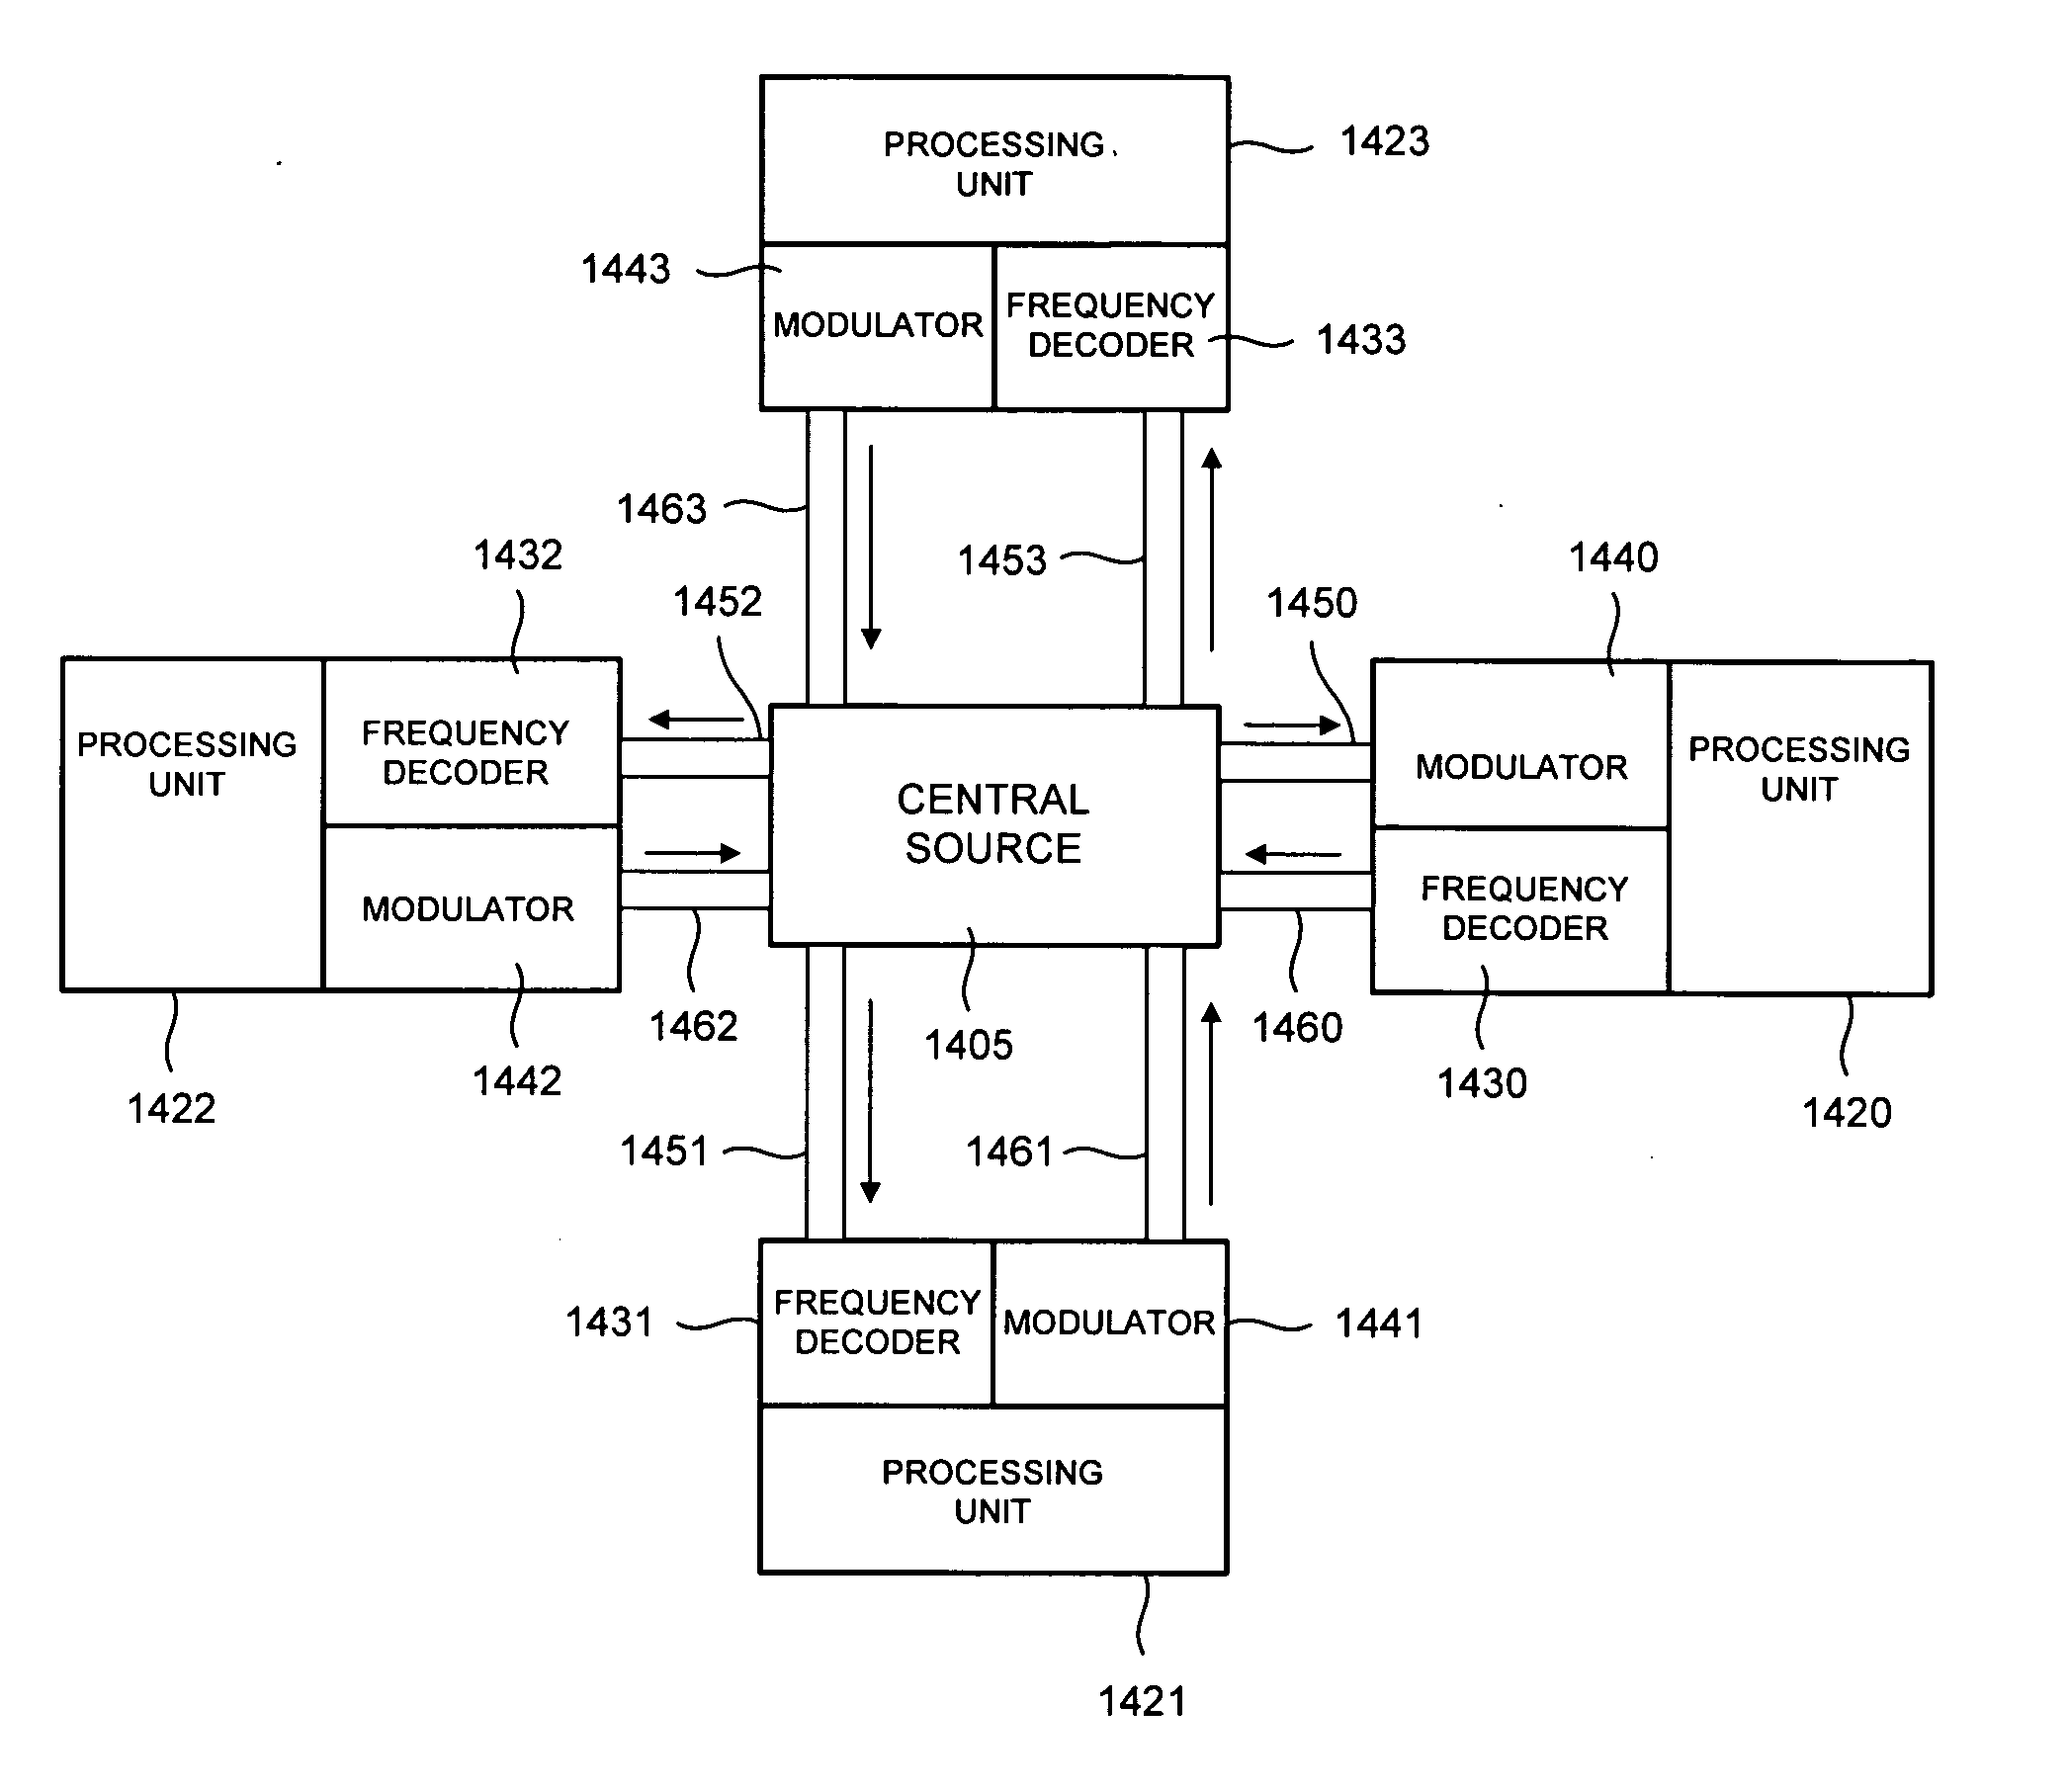 Photonic interconnections that include optical transmission paths for transmitting optical signals